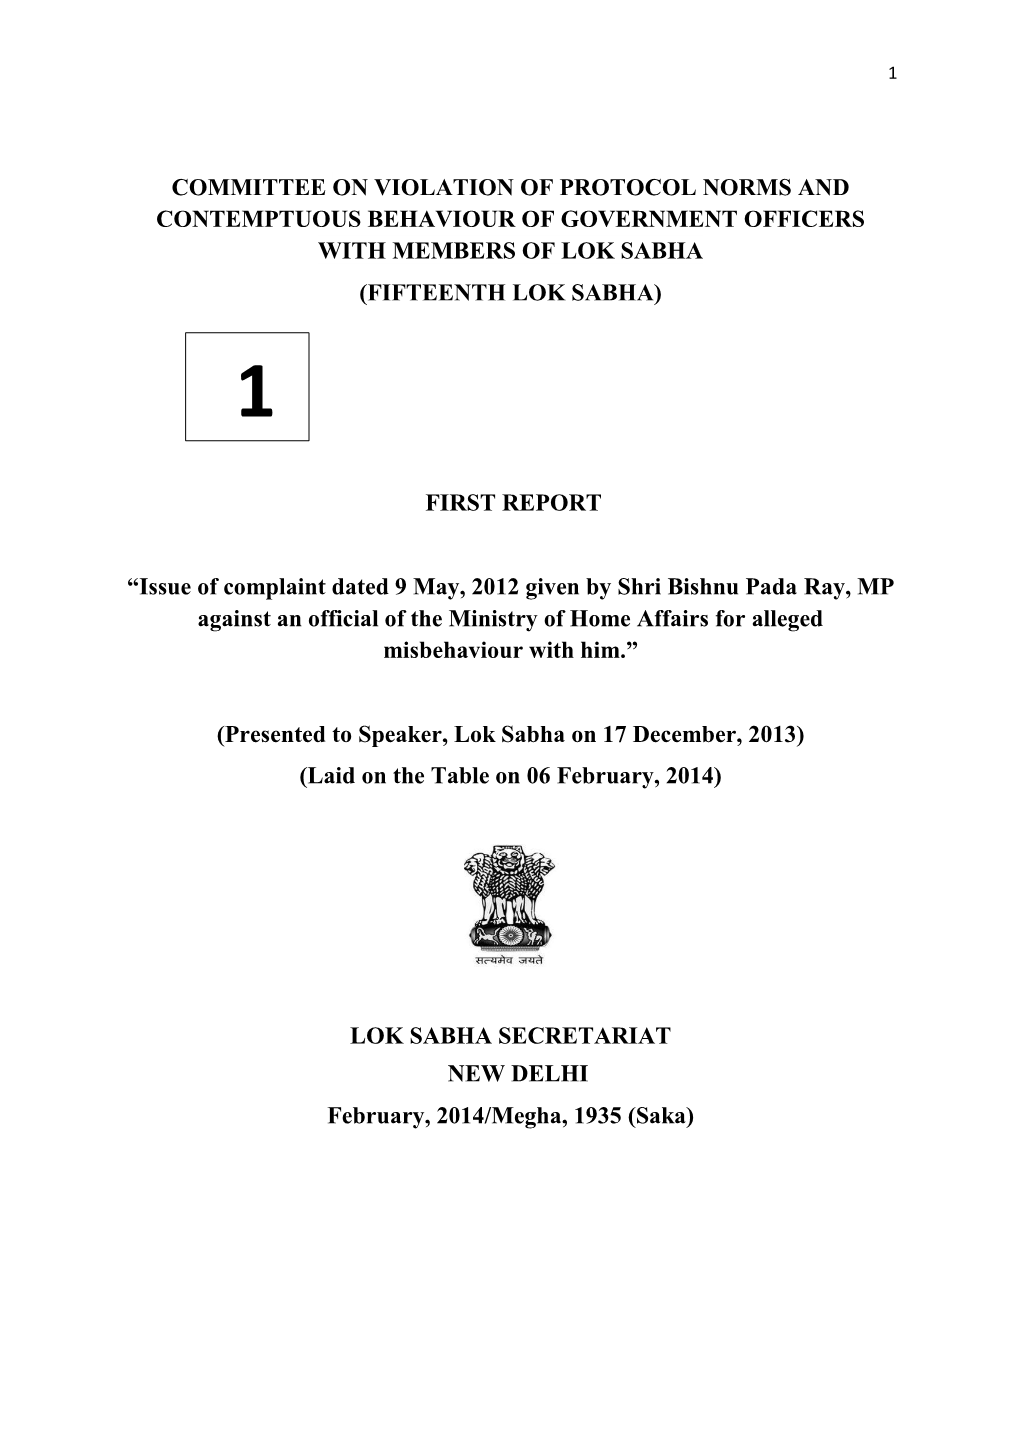 Committee on Violation of Protocol Norms and Contemptuous Behaviour of Government Officers with Members of Lok Sabha (Fifteenth Lok Sabha)